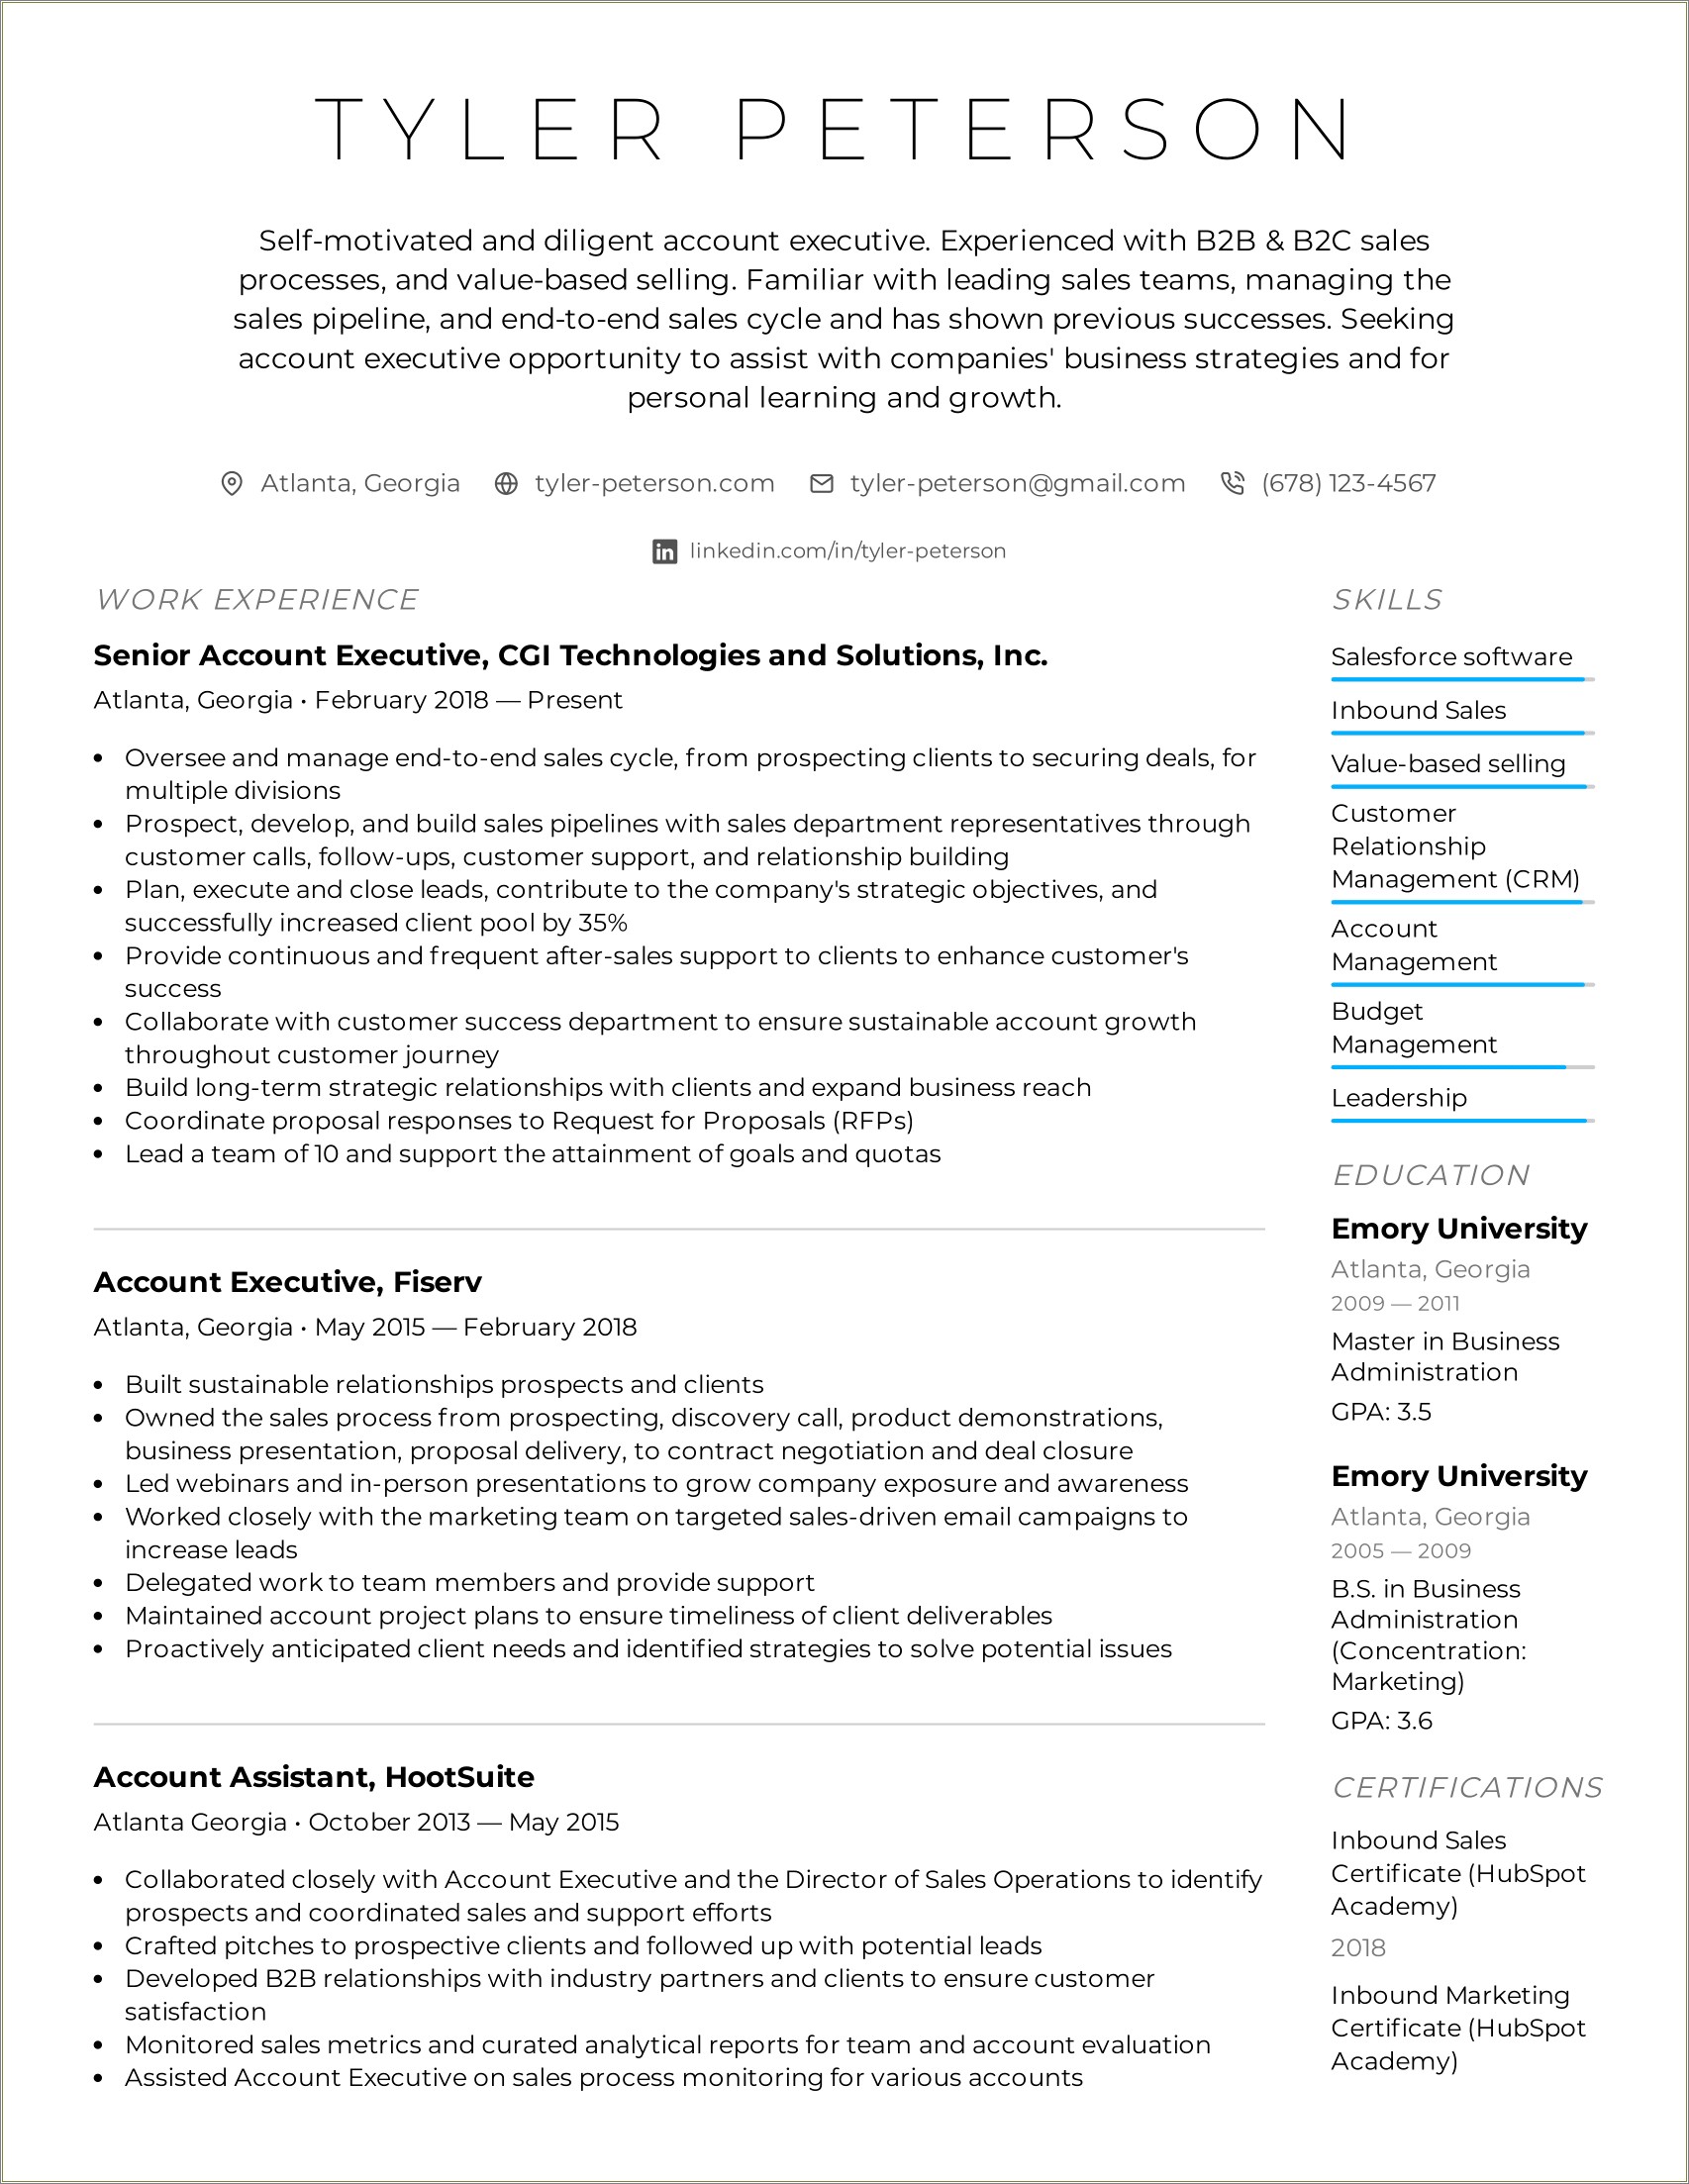 Sample Resume For An Sales Account Executive